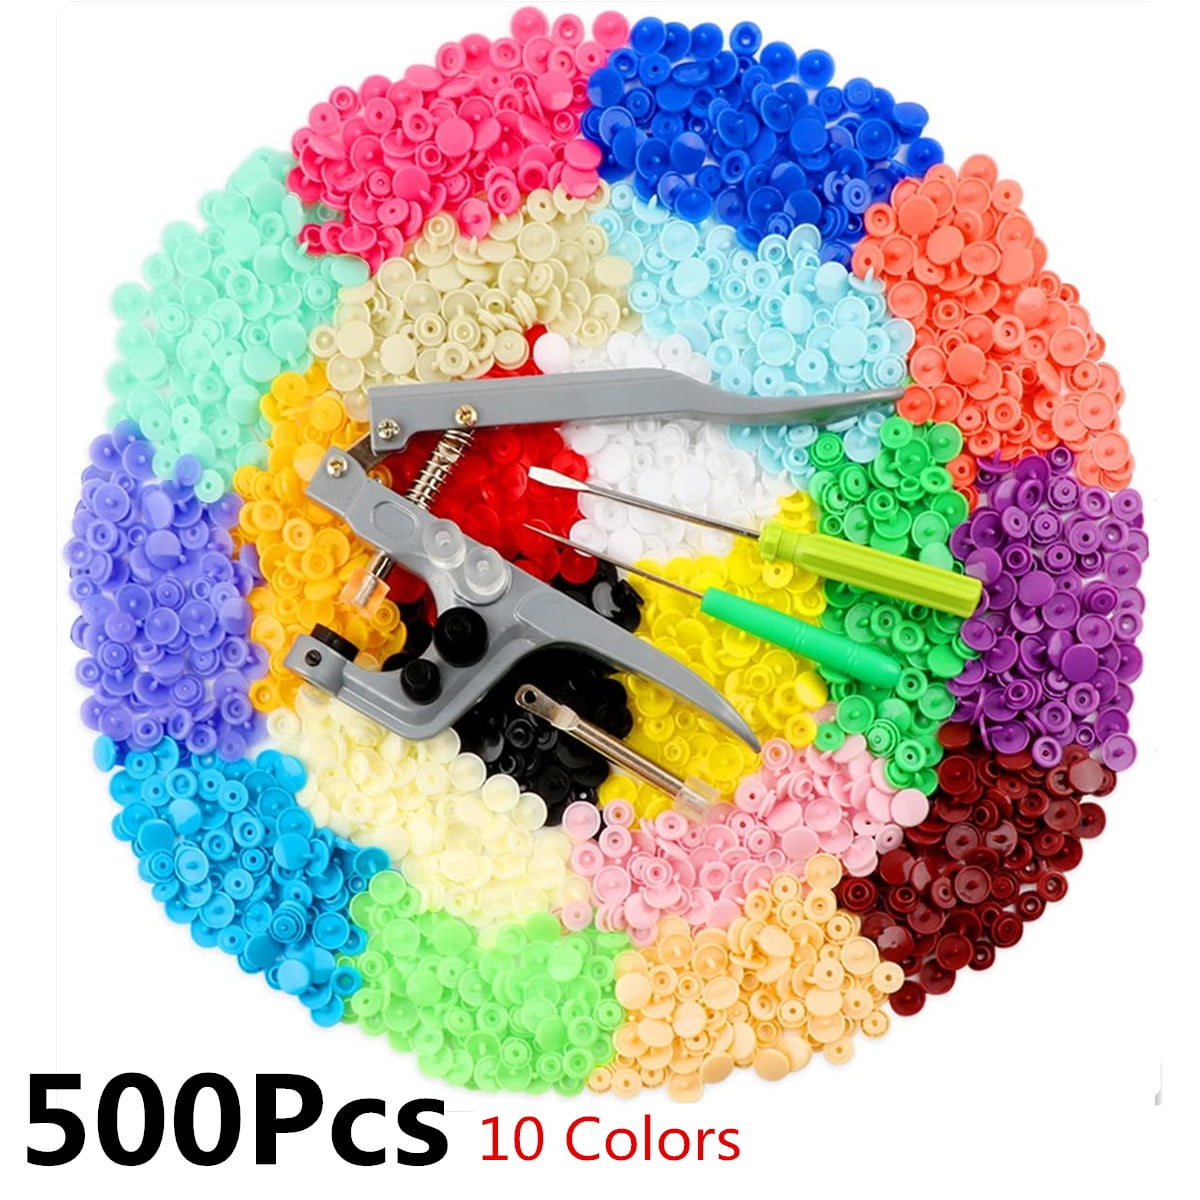 150 Sets 15 Colors Plastic Snap Buttons No-Sew T5 Folwer Shape Snaps with Organizer Storage Case 